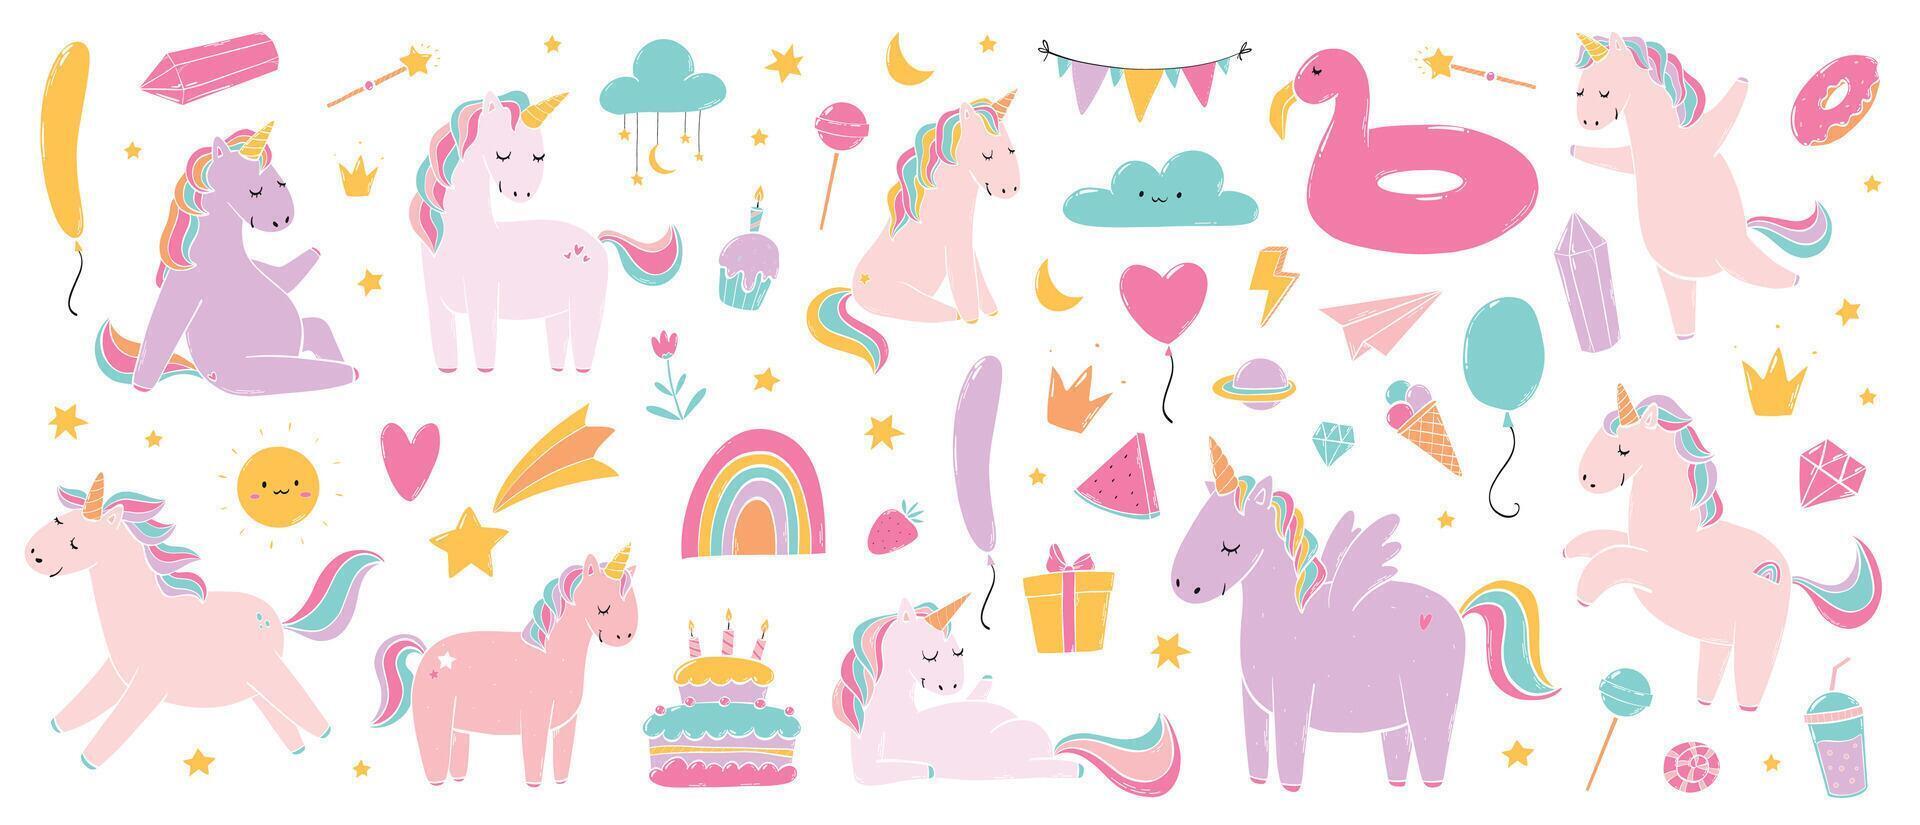 set of cute nursery doodles, birthday clip art, cartoon elements for stickers, prints, cards, posters, banners, sublimation, etc. EPS 10 vector